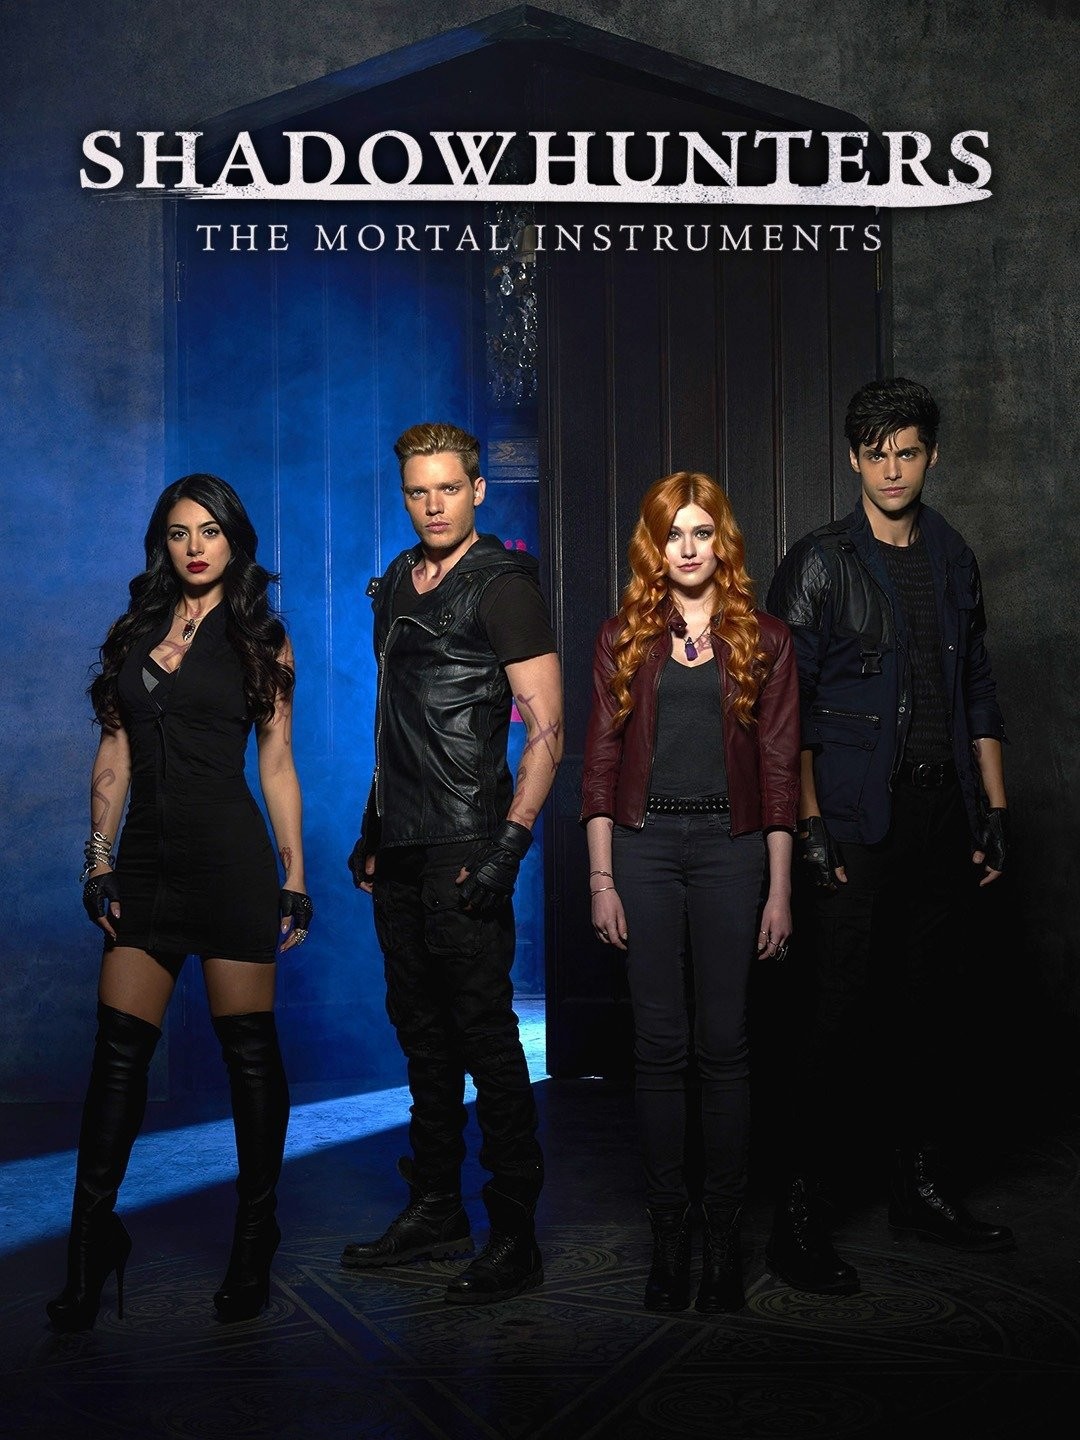 CAMILLE BELCOURT'S - Los Angeles' Shadowhunter Institute